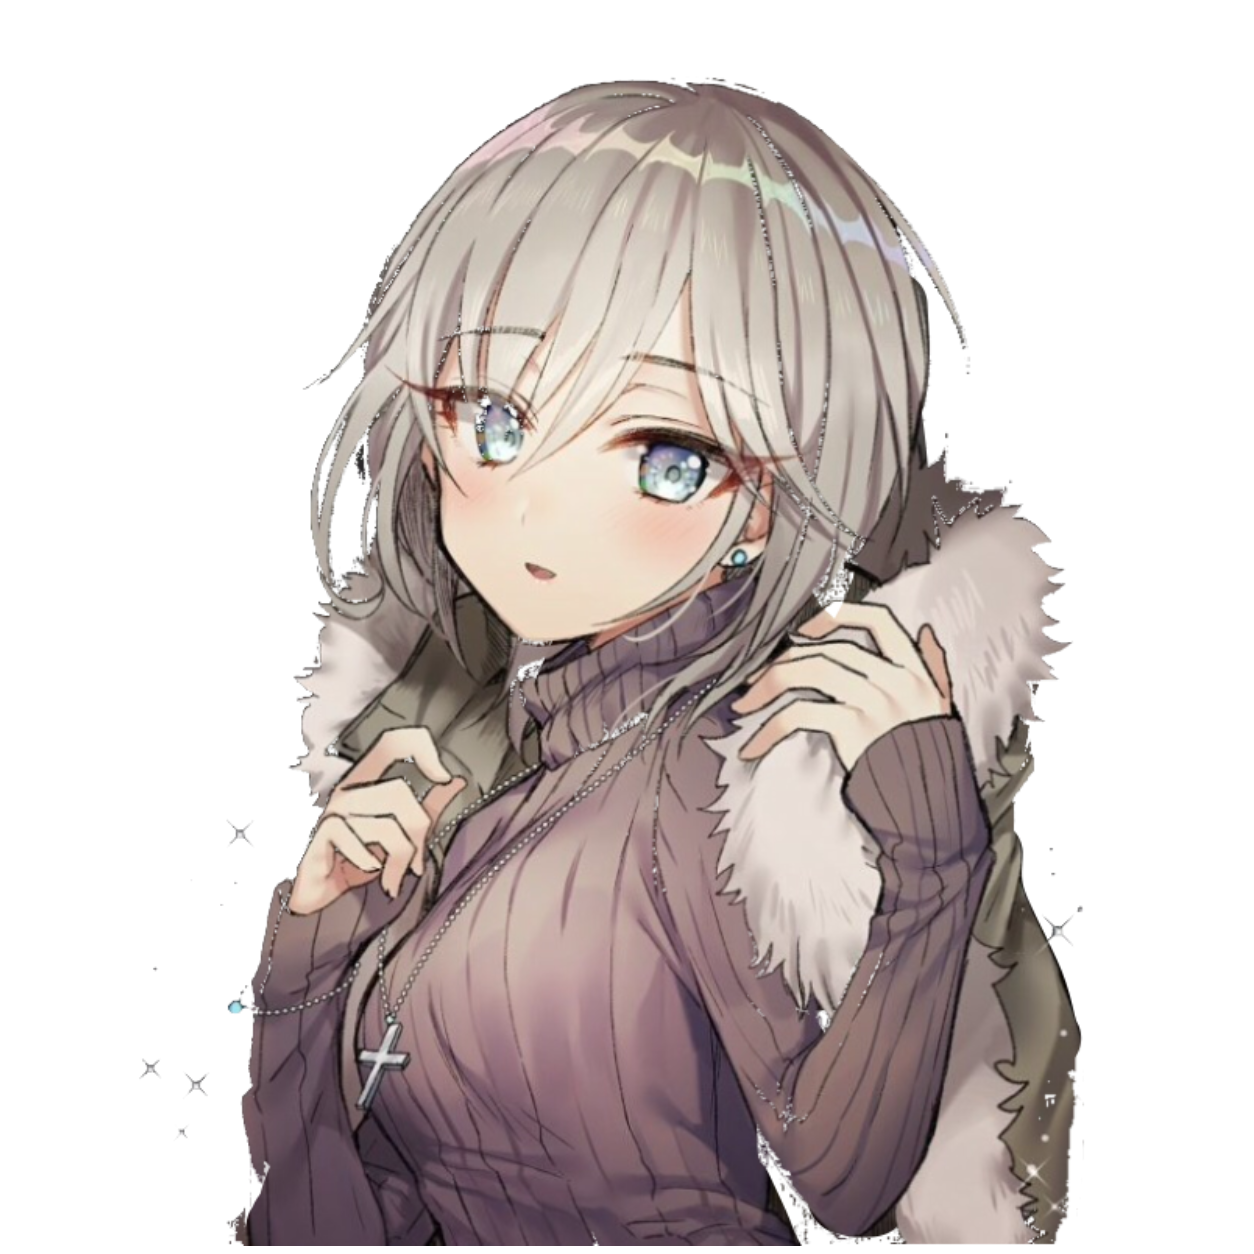 Anime Girl With Grey Hair And Blue Eyes